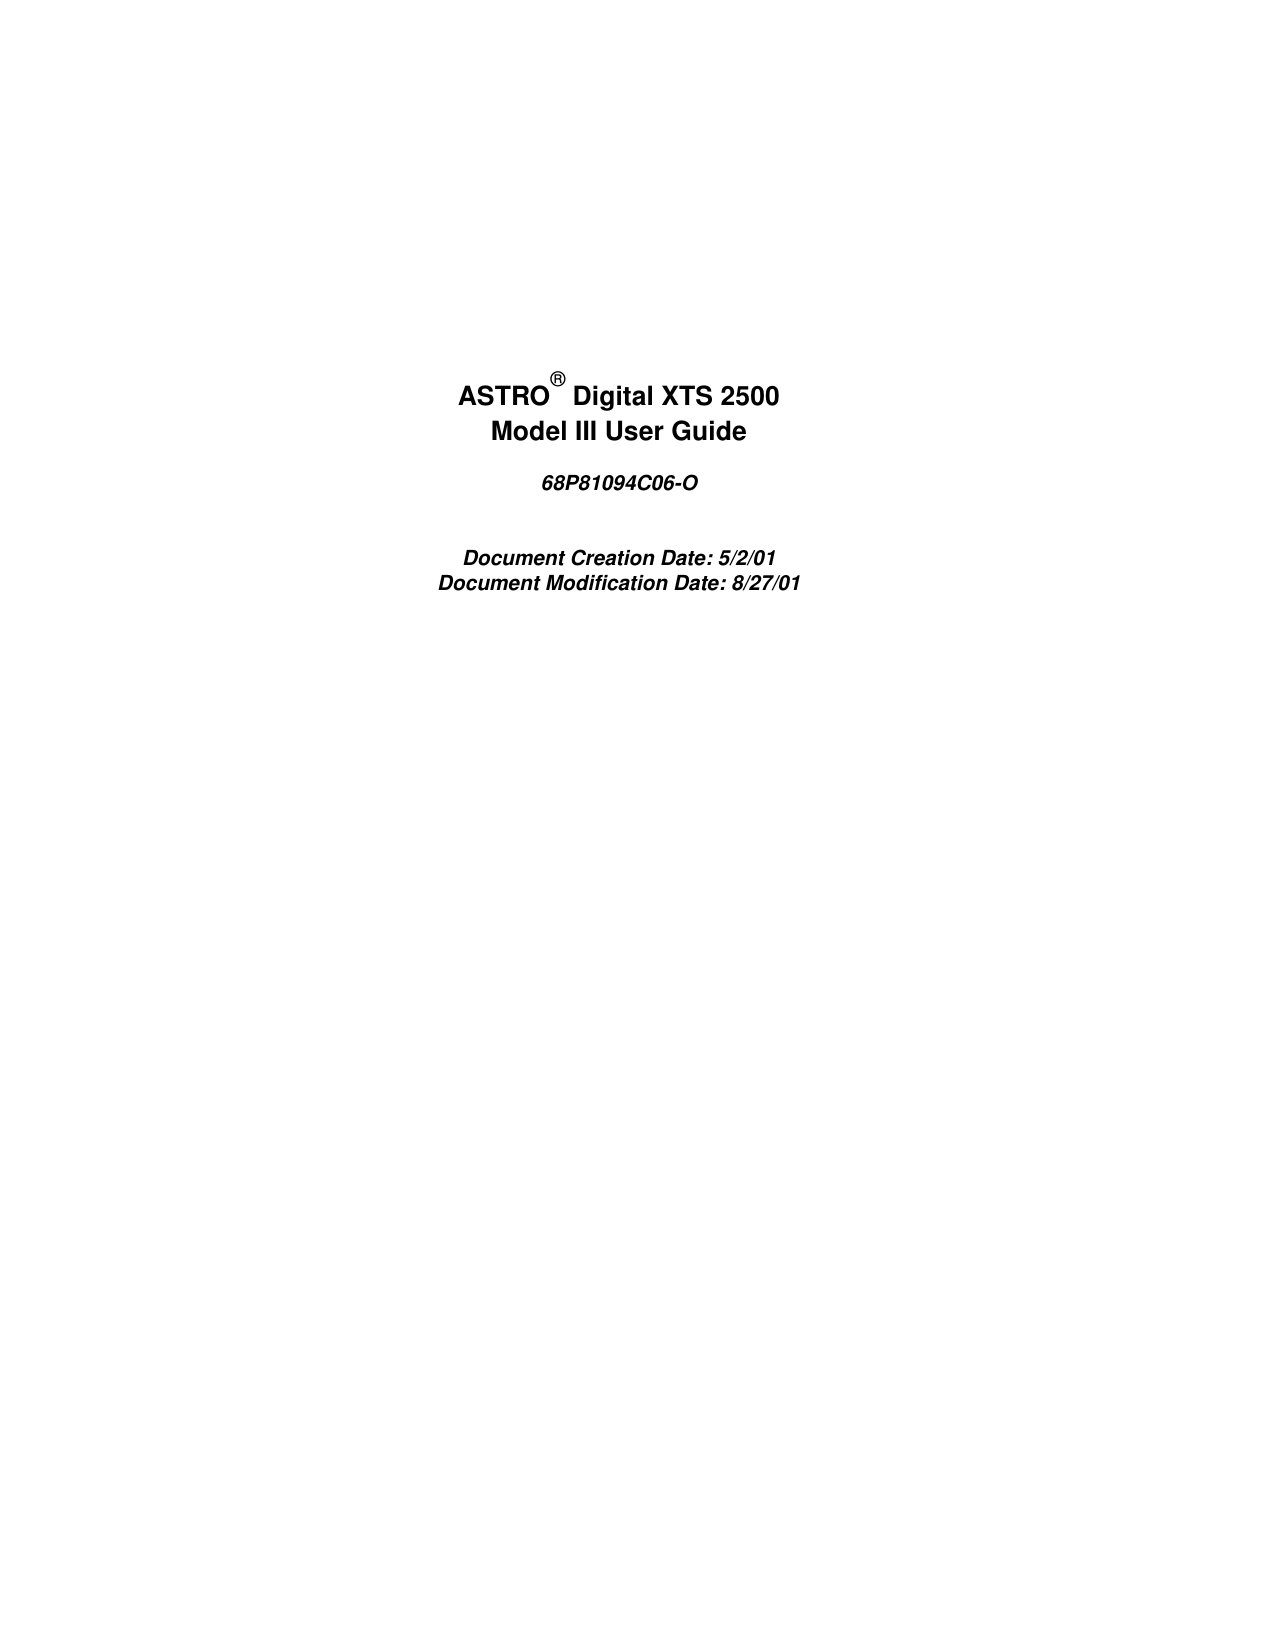 ASTRO® Digital XTS 2500 Model III User Guide68P81094C06-ODocument Creation Date: 5/2/01Document Modification Date: 8/27/01